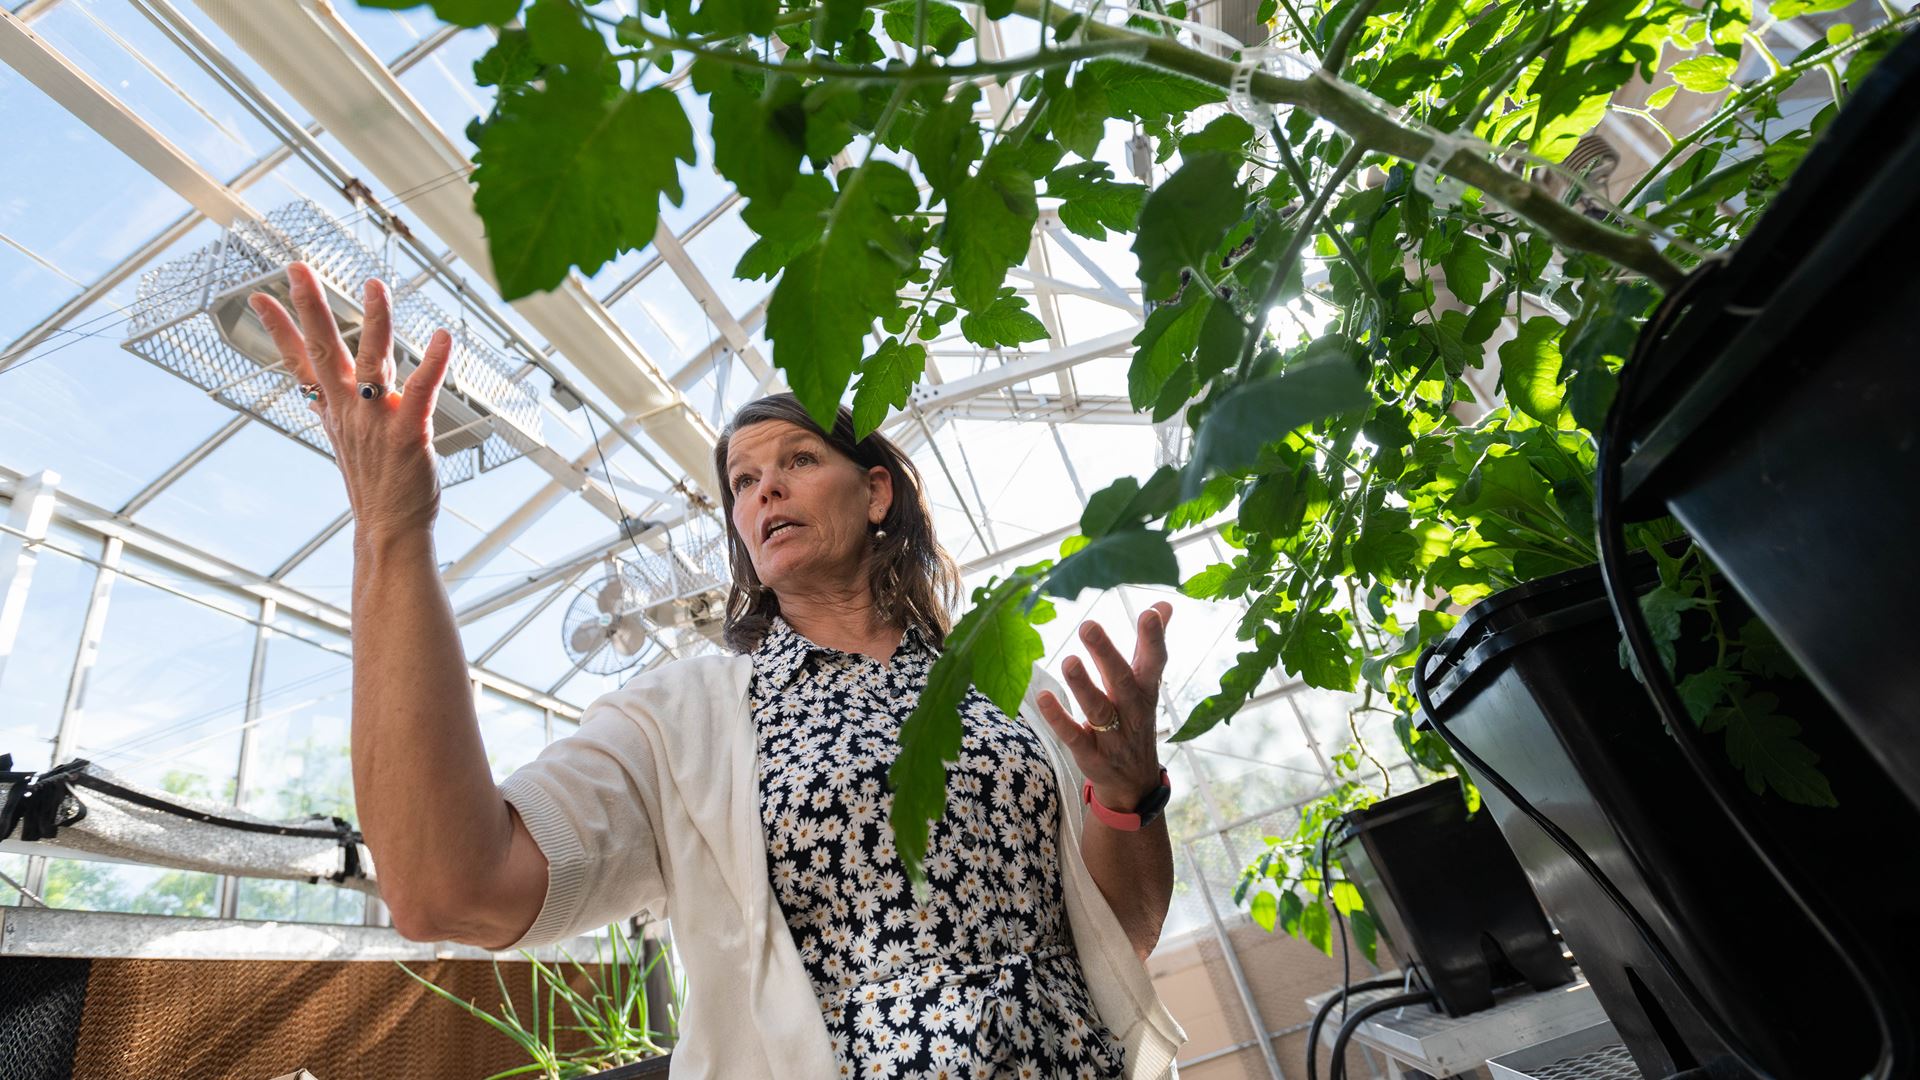 NMSU class lets students dive into soil-less growing systems